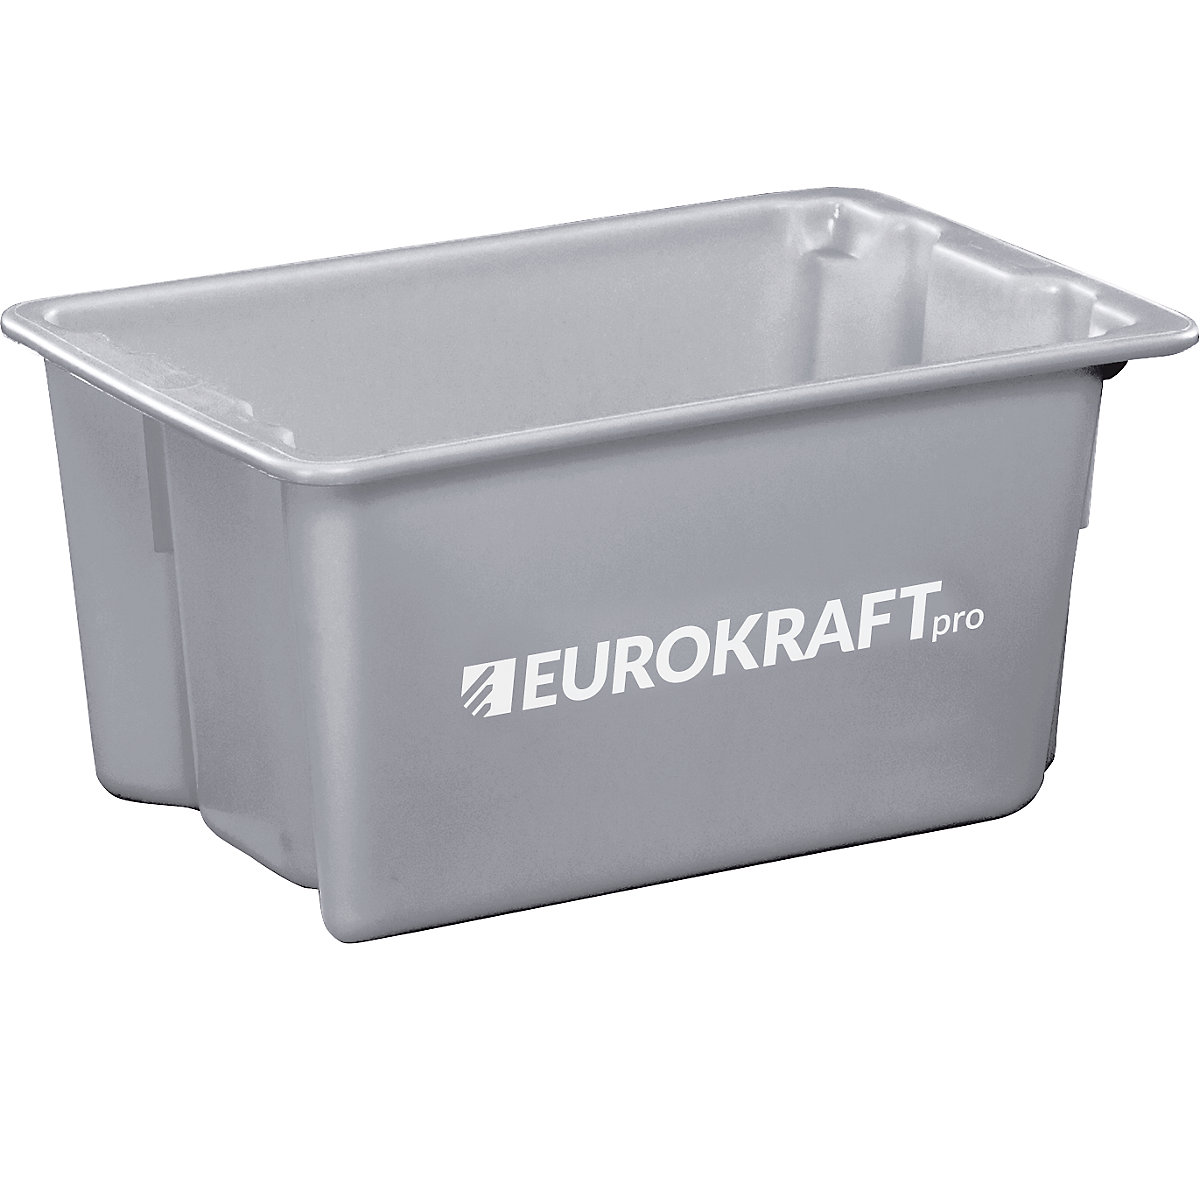 EUROKRAFTpro – Stack/nest container made of polypropylene suitable for foodstuffs, 50 l capacity, pack of 3, solid walls and base, grey